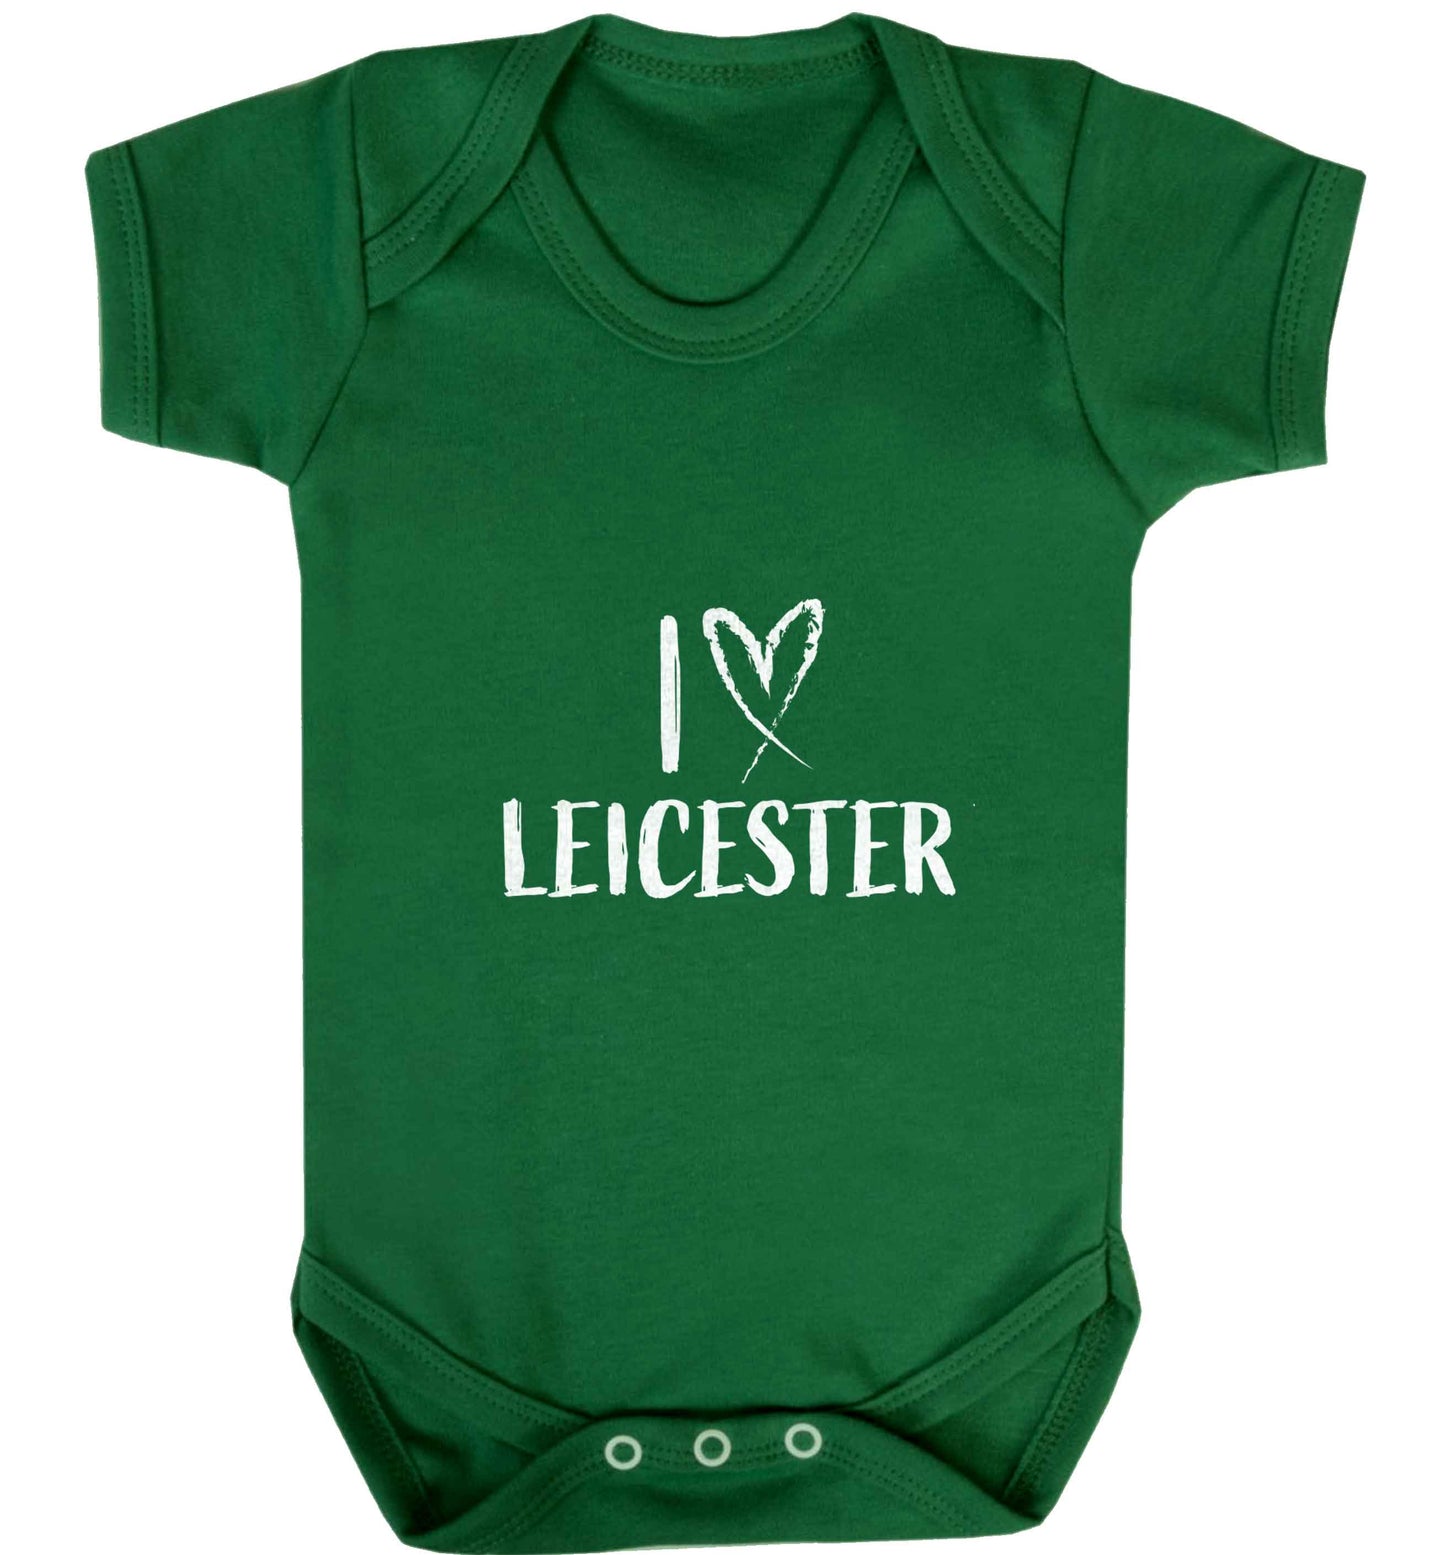 I love Leicester baby vest green 18-24 months